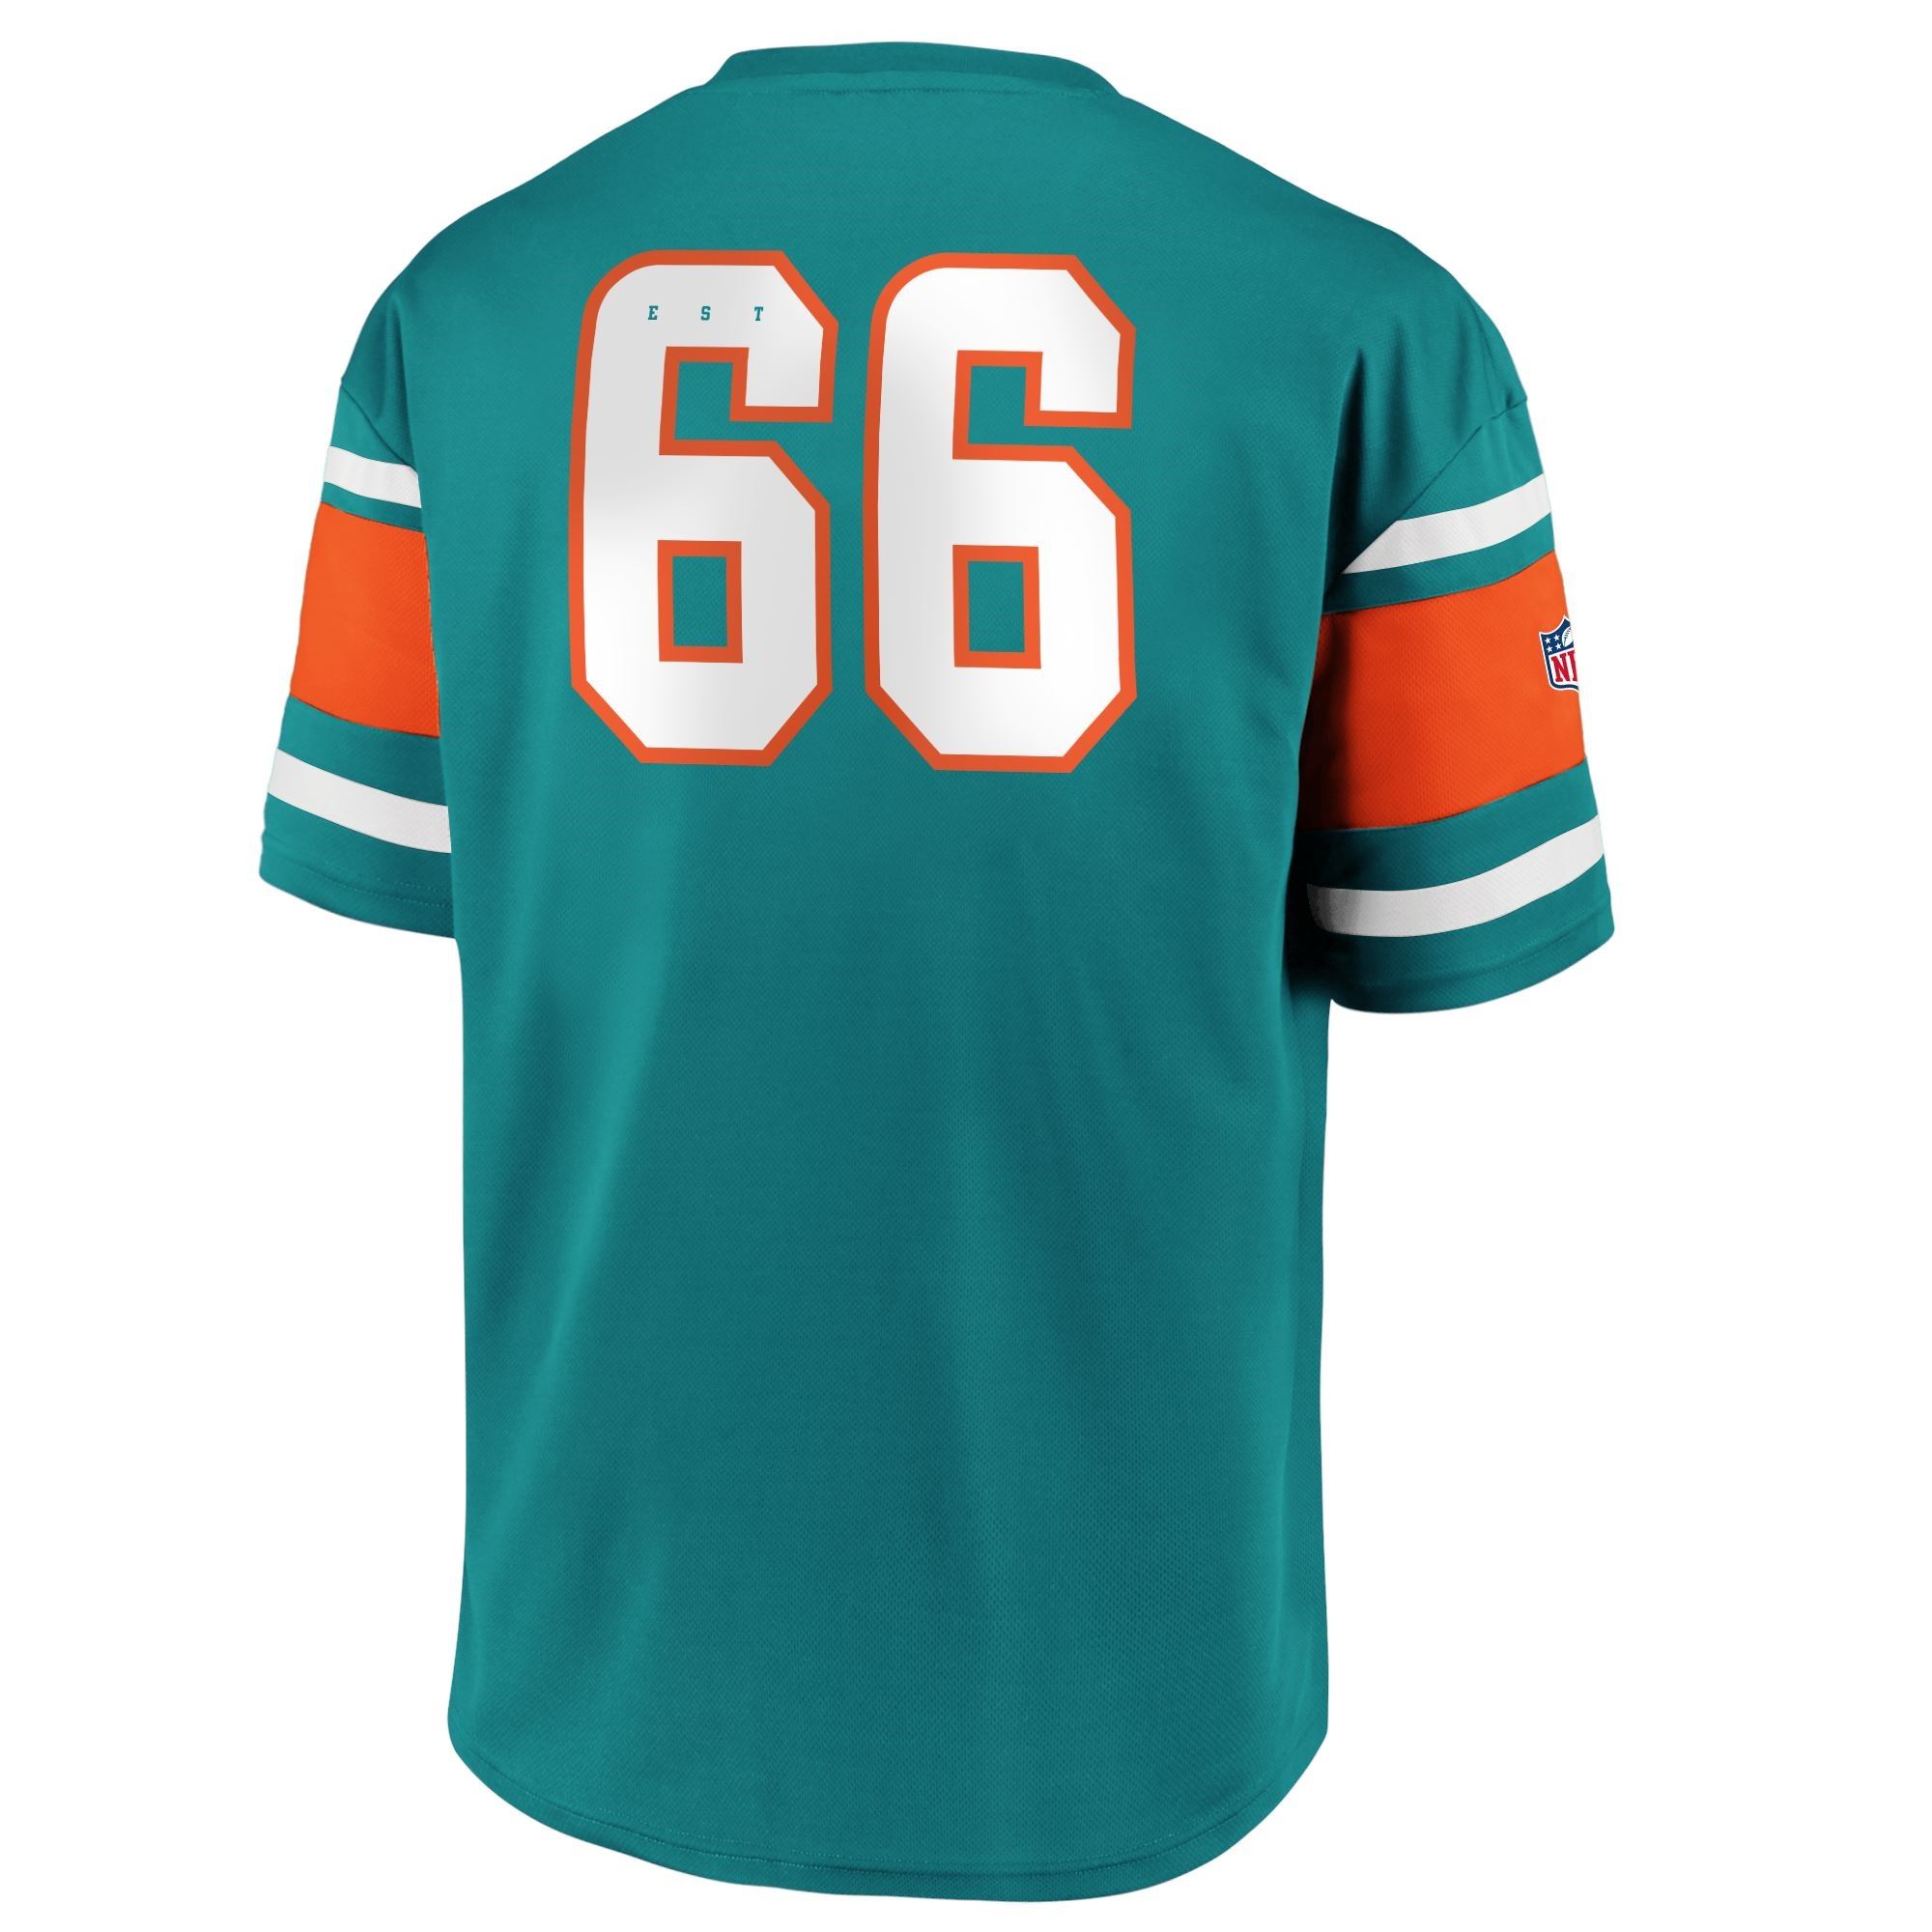 Miami Dolphins NFL Team Value Franchise Poly Mesh Supporters Jersey Fanatics